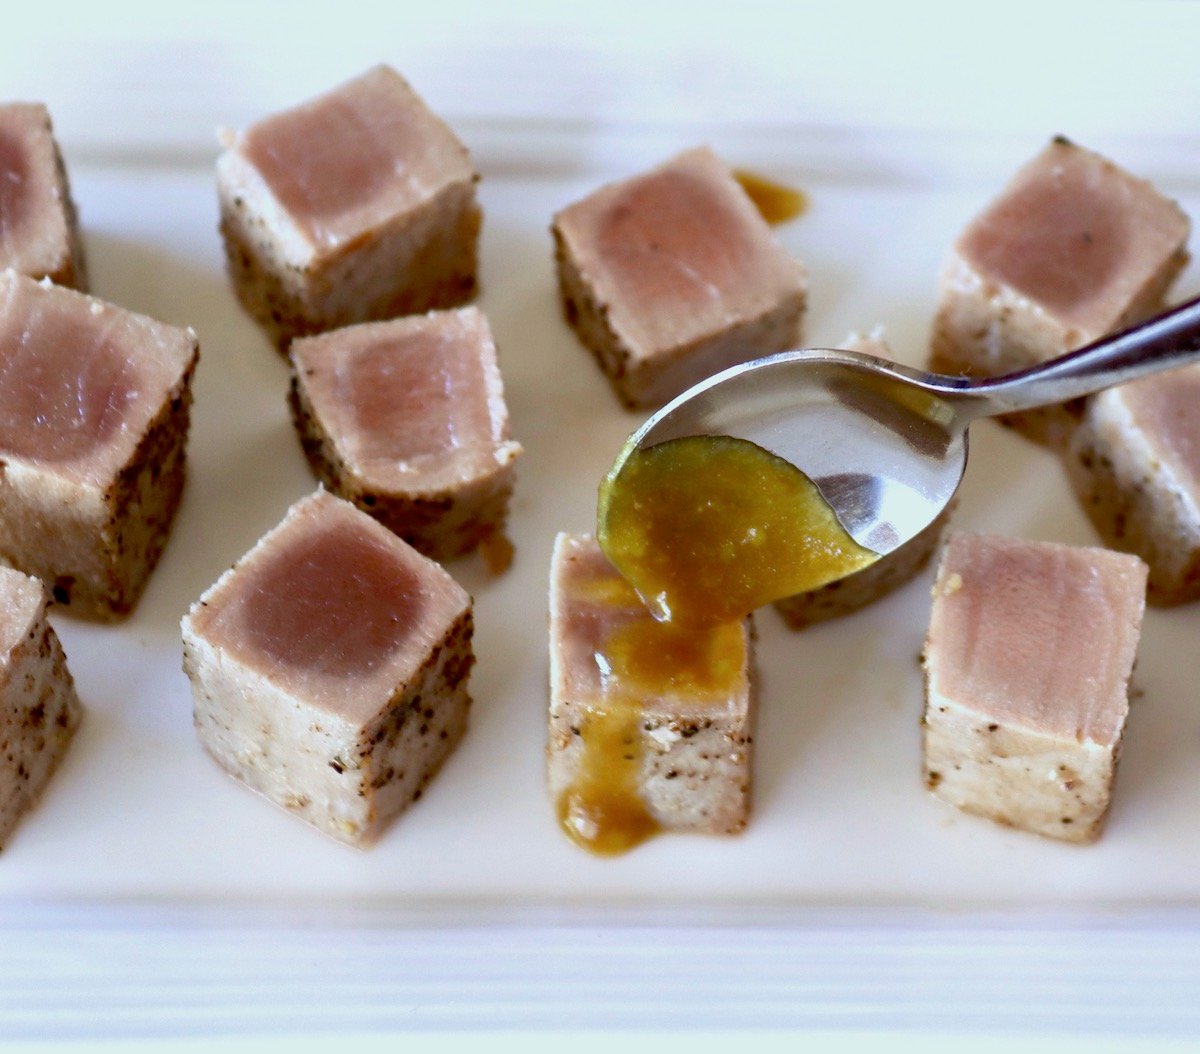 Several small cubes of seared ahi tuna on a white plate with wasabi glaze being drizzled over one.